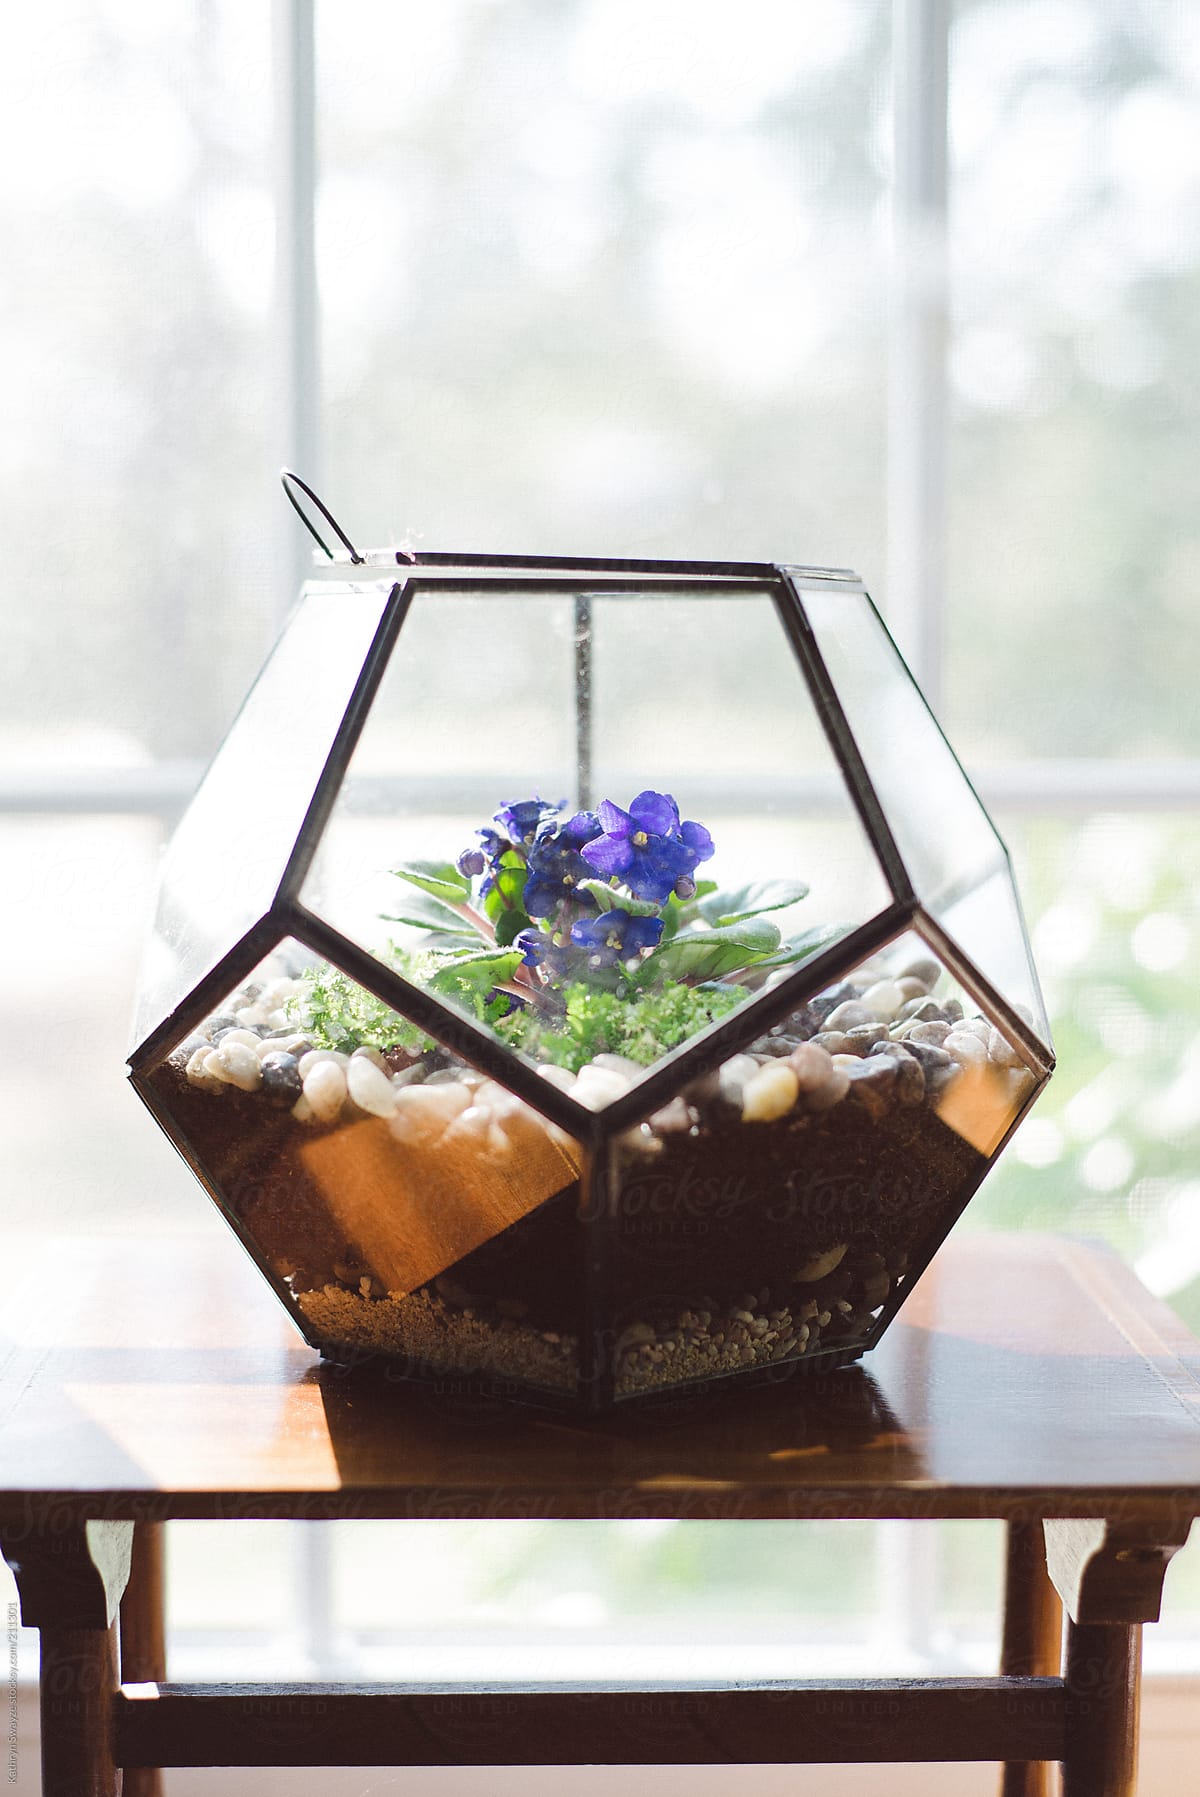 An African Violet sits inside a geometric glass container in front of a window.